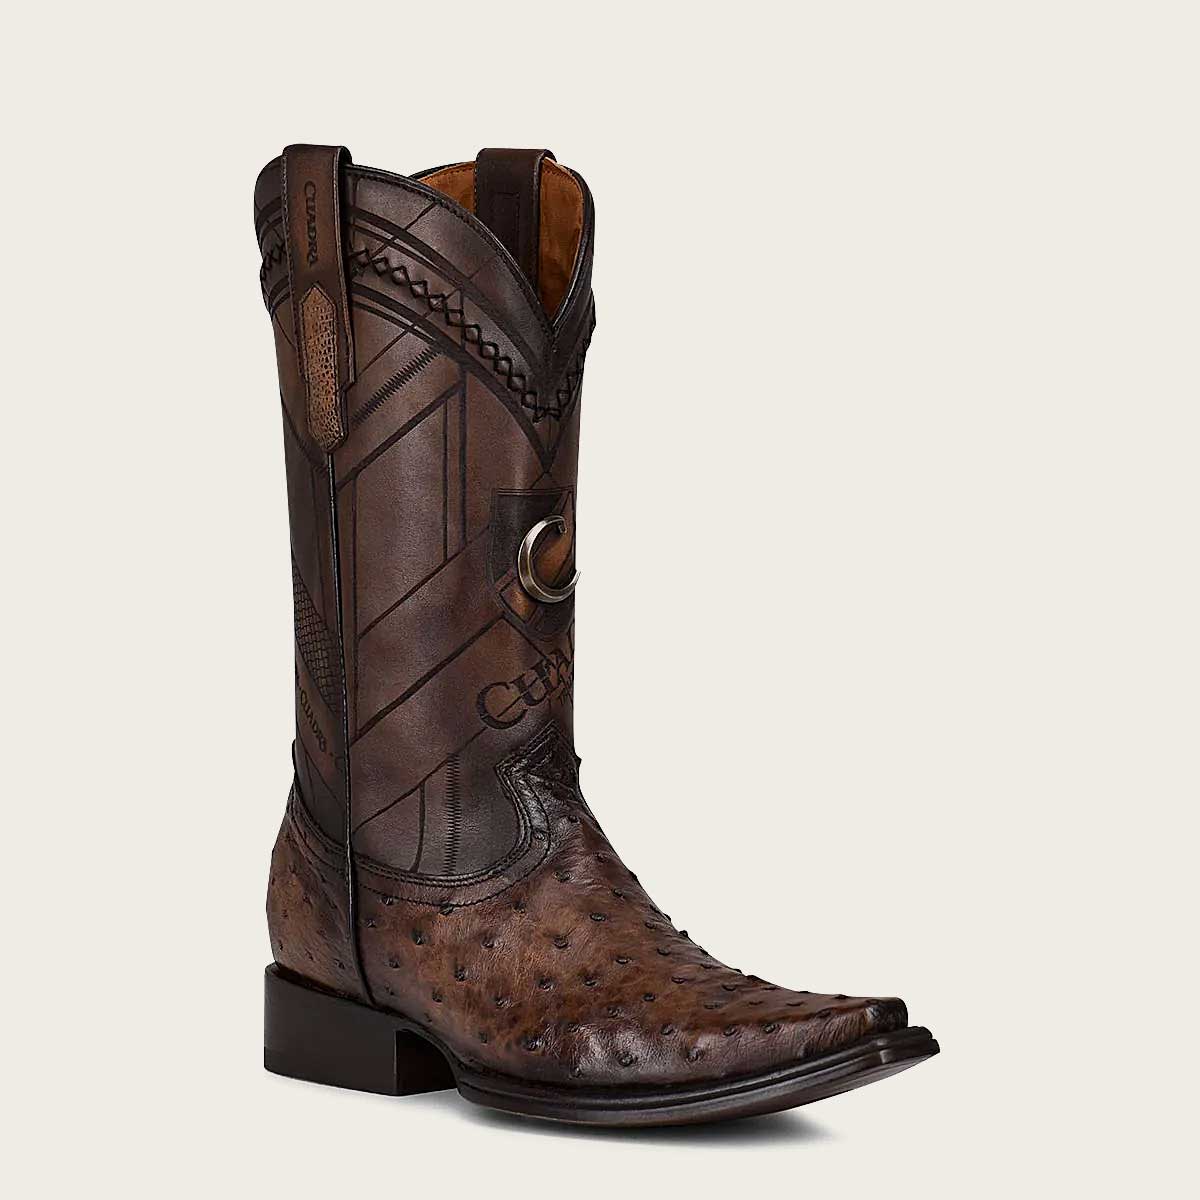 Engraved dark brown leather boot